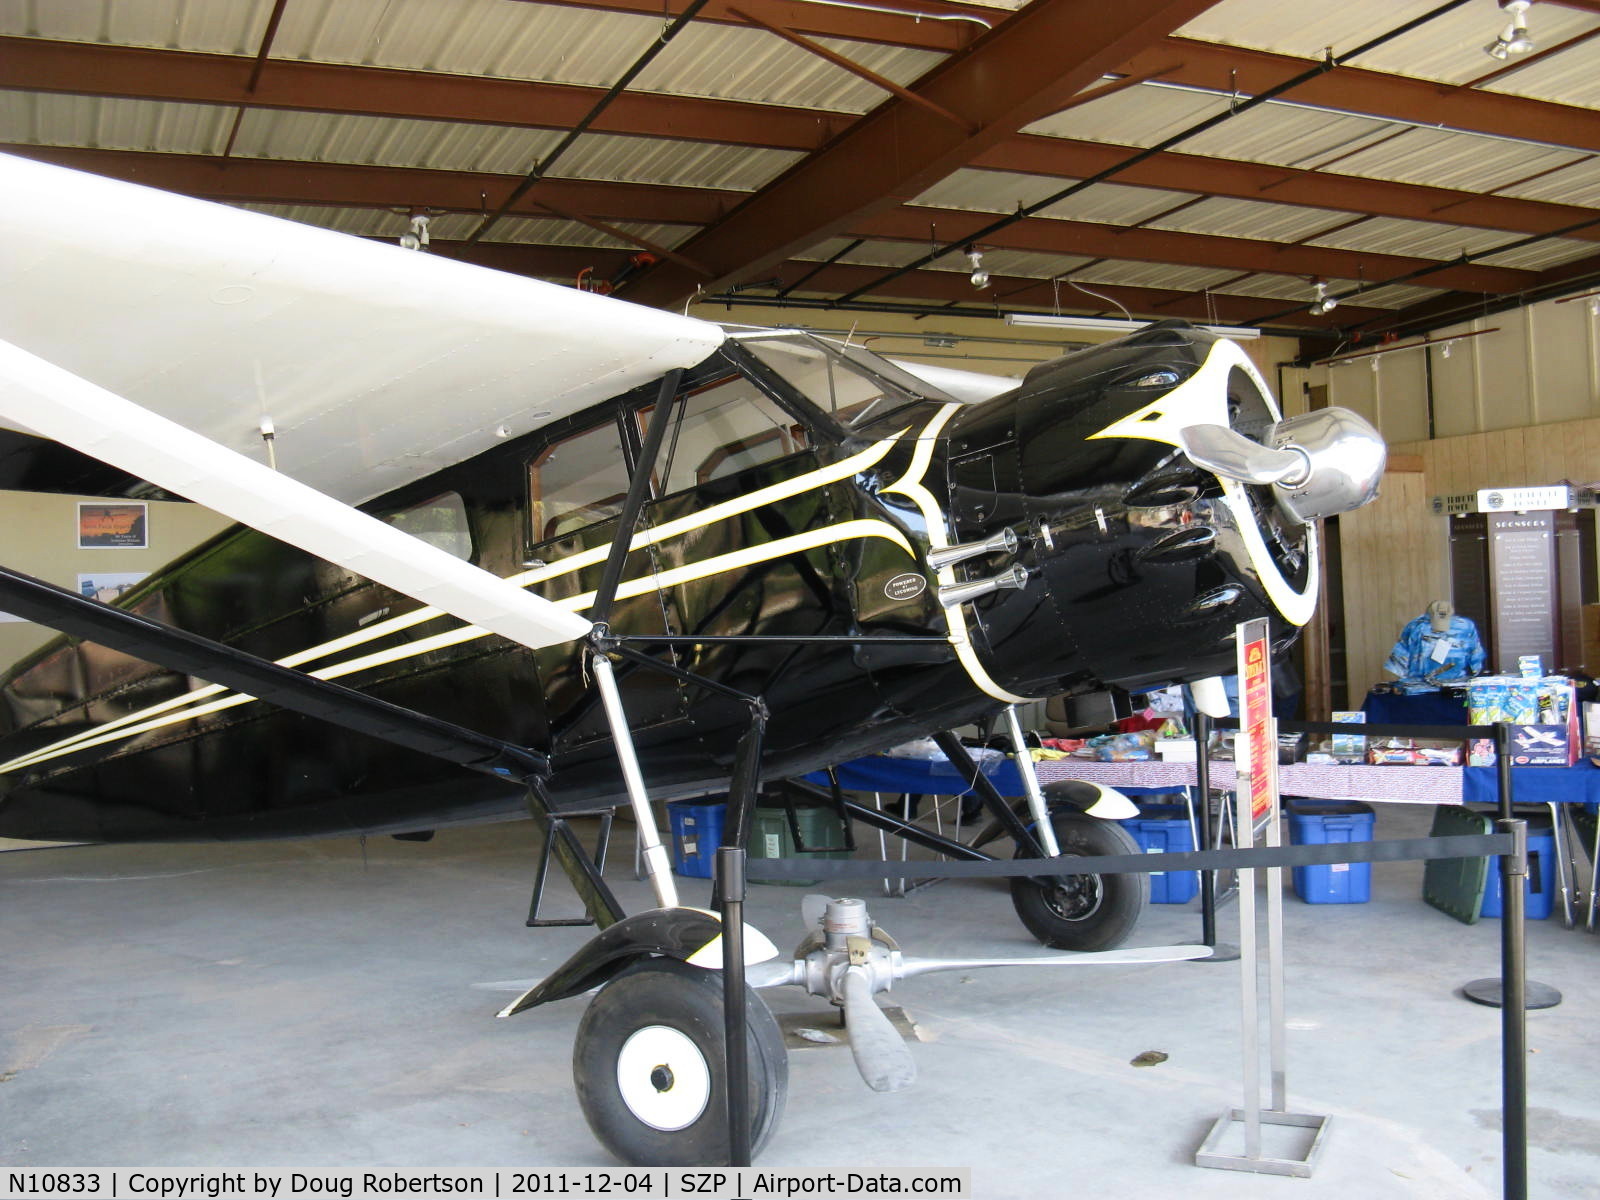 N10833, 1931 Stinson JR. S C/N 8027, 1931 Stinson JUNIOR S, Lycoming R680E 215 Hp radial, now cowled on display at Aviation Museum of Santa Paula. Generous gift of Clay Lacy, Thank you, Clay!